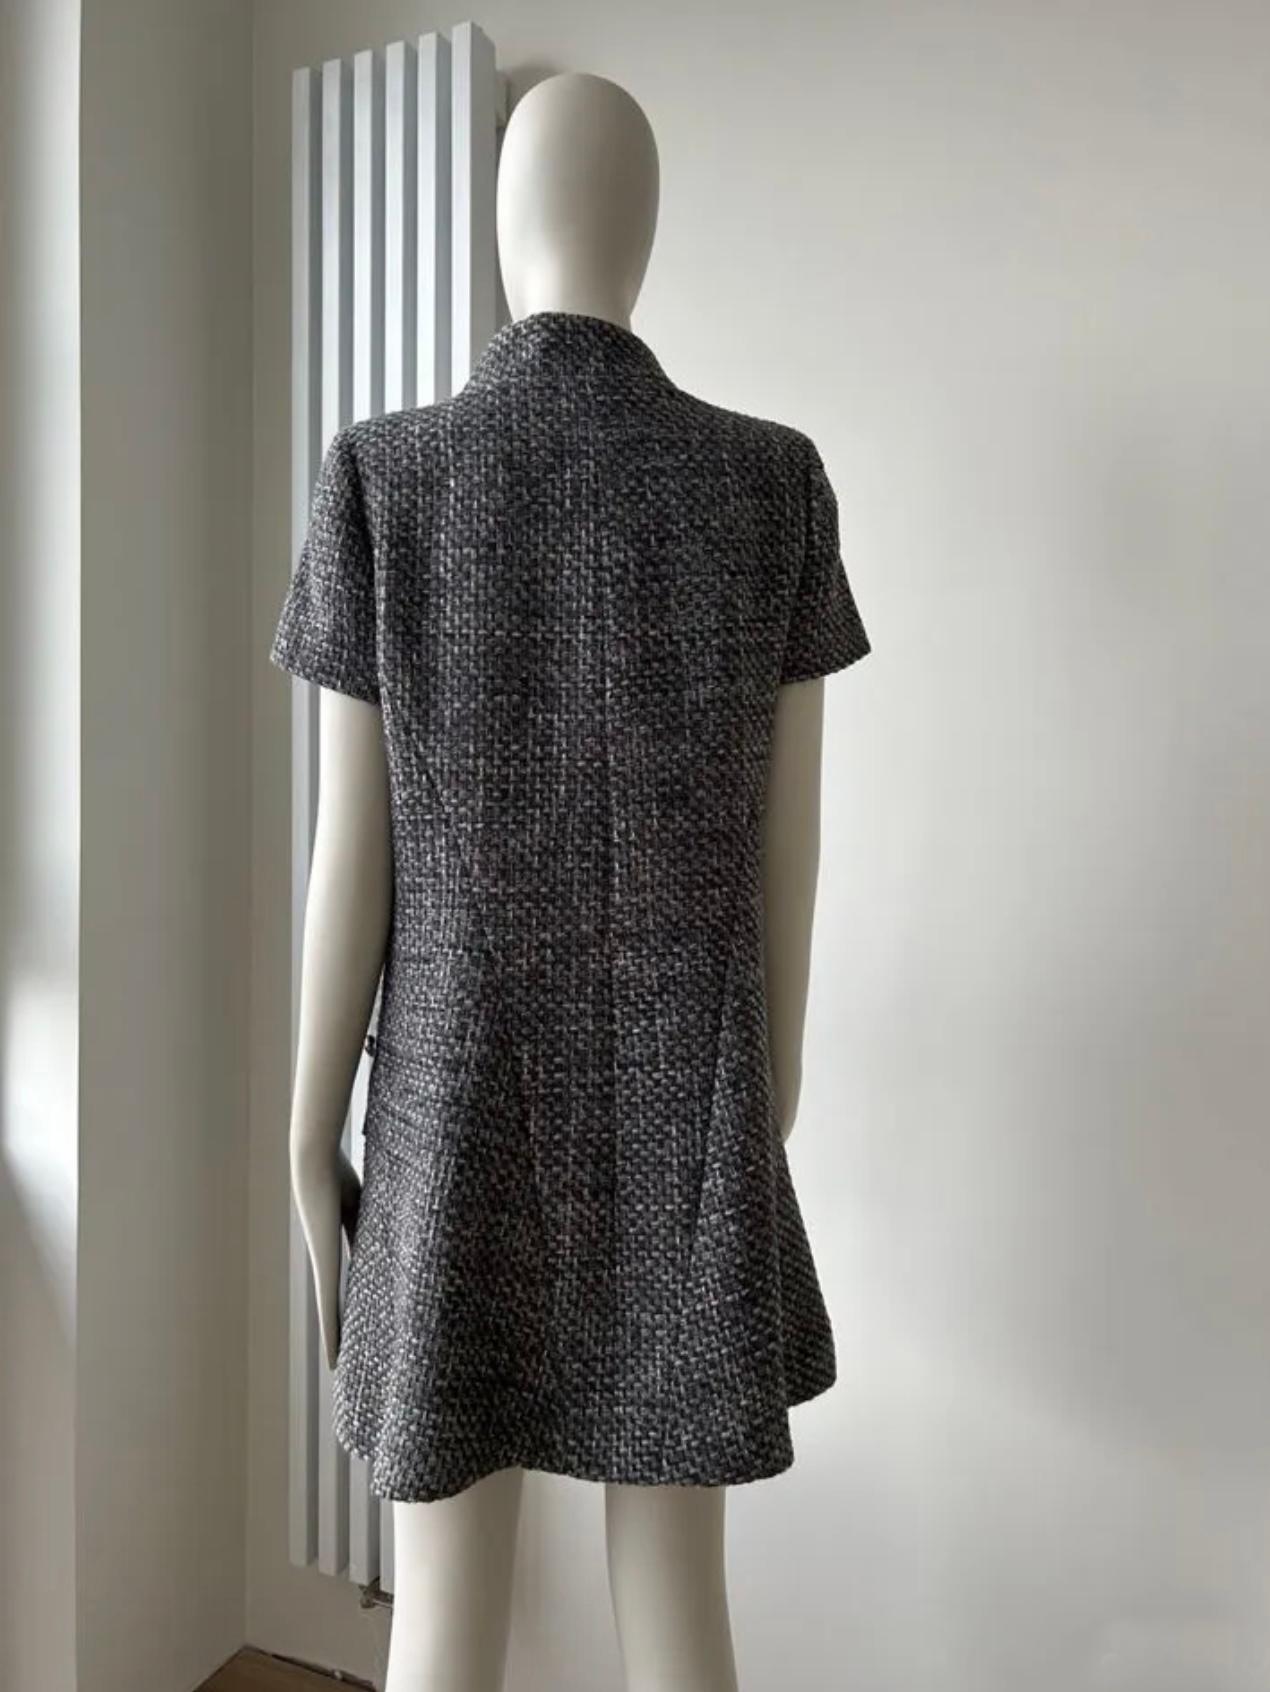 Chanel Lily Allen Style Grey Tweed Jacket For Sale 4